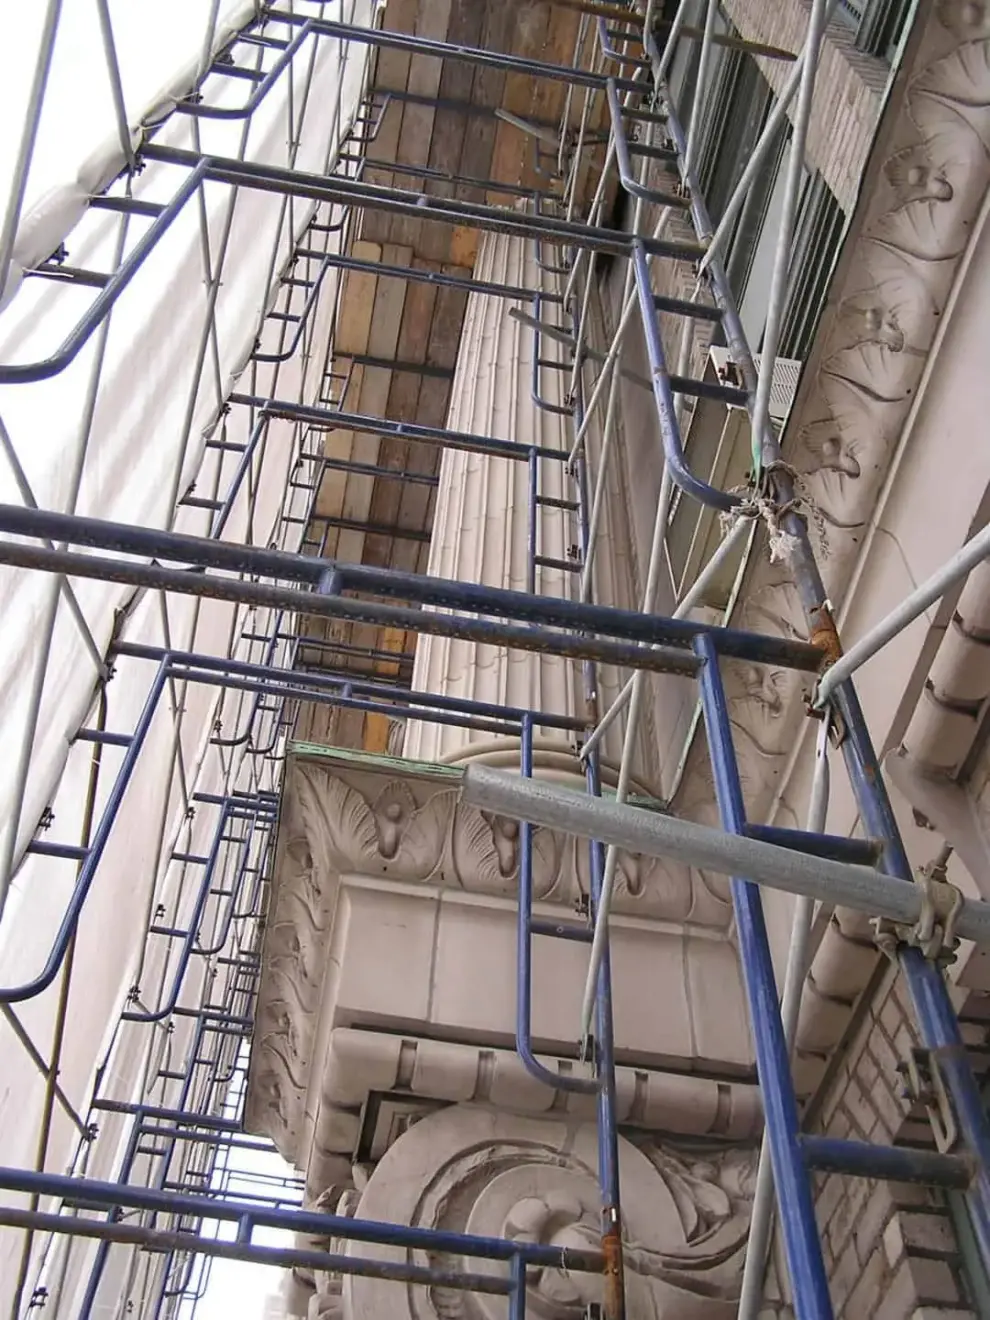 Cintec in North America Announces their Cintec Anchoring System was used in helping Repair the Helmsley Building 230 Park Avenue, NYC